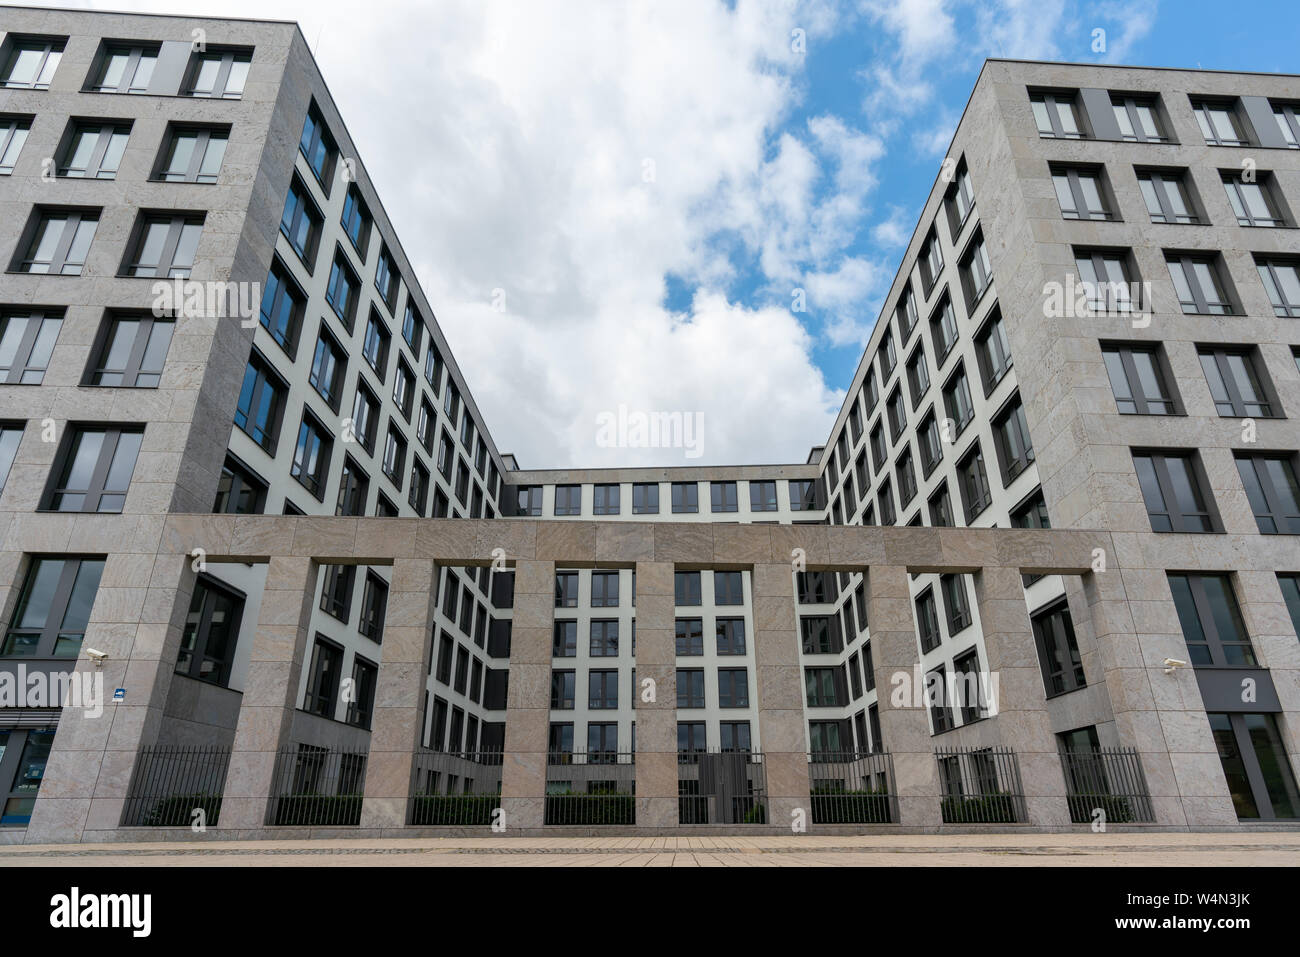 Elisabeth-Schwarzhaupt-Platz, Berlin, Germany - july 07, 2019: facade of the Nordbahnhof Carre buildings with db sign on the roof Stock Photo